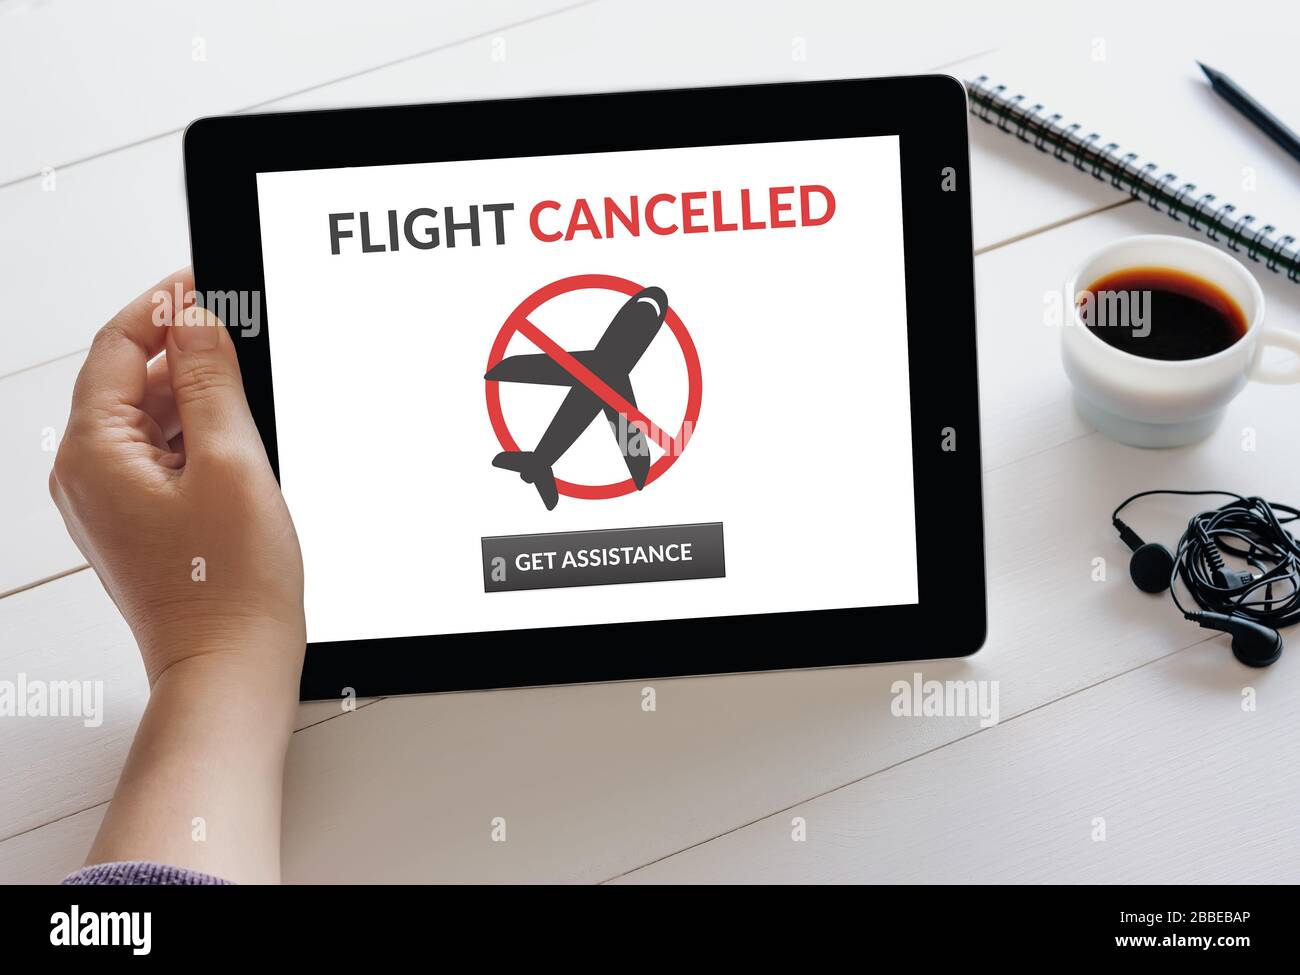 Hand holding digital tablet computer with flight cancelled concept on screen. Stock Photo